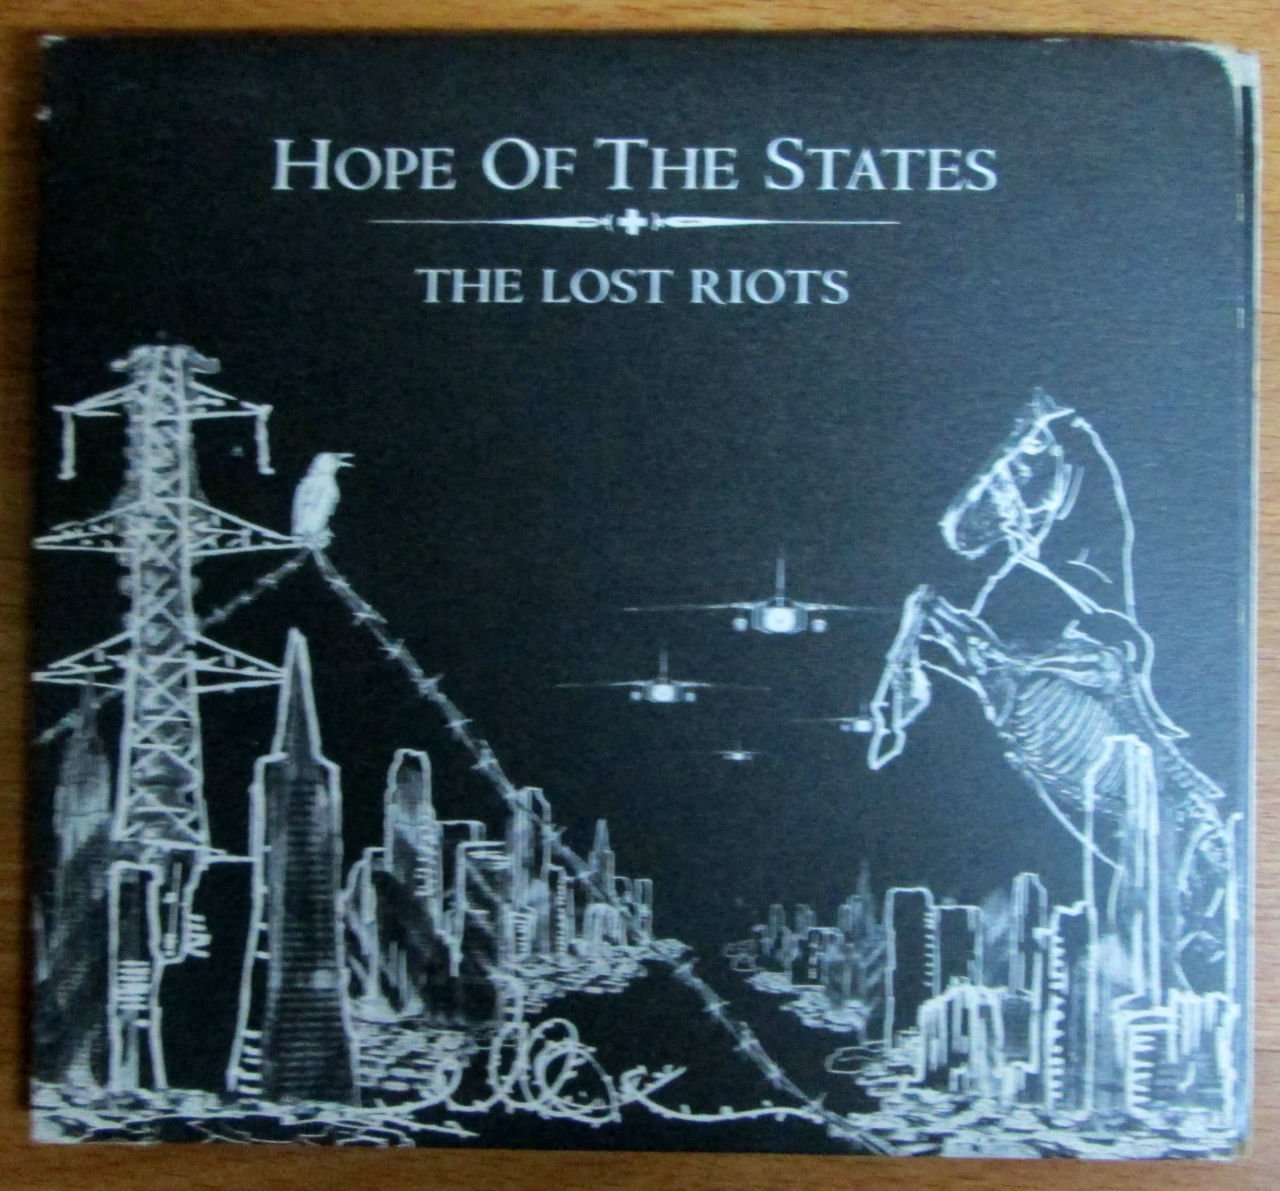 HOPE OF THE STATES - THE LOST RIOTS CD 2.EL